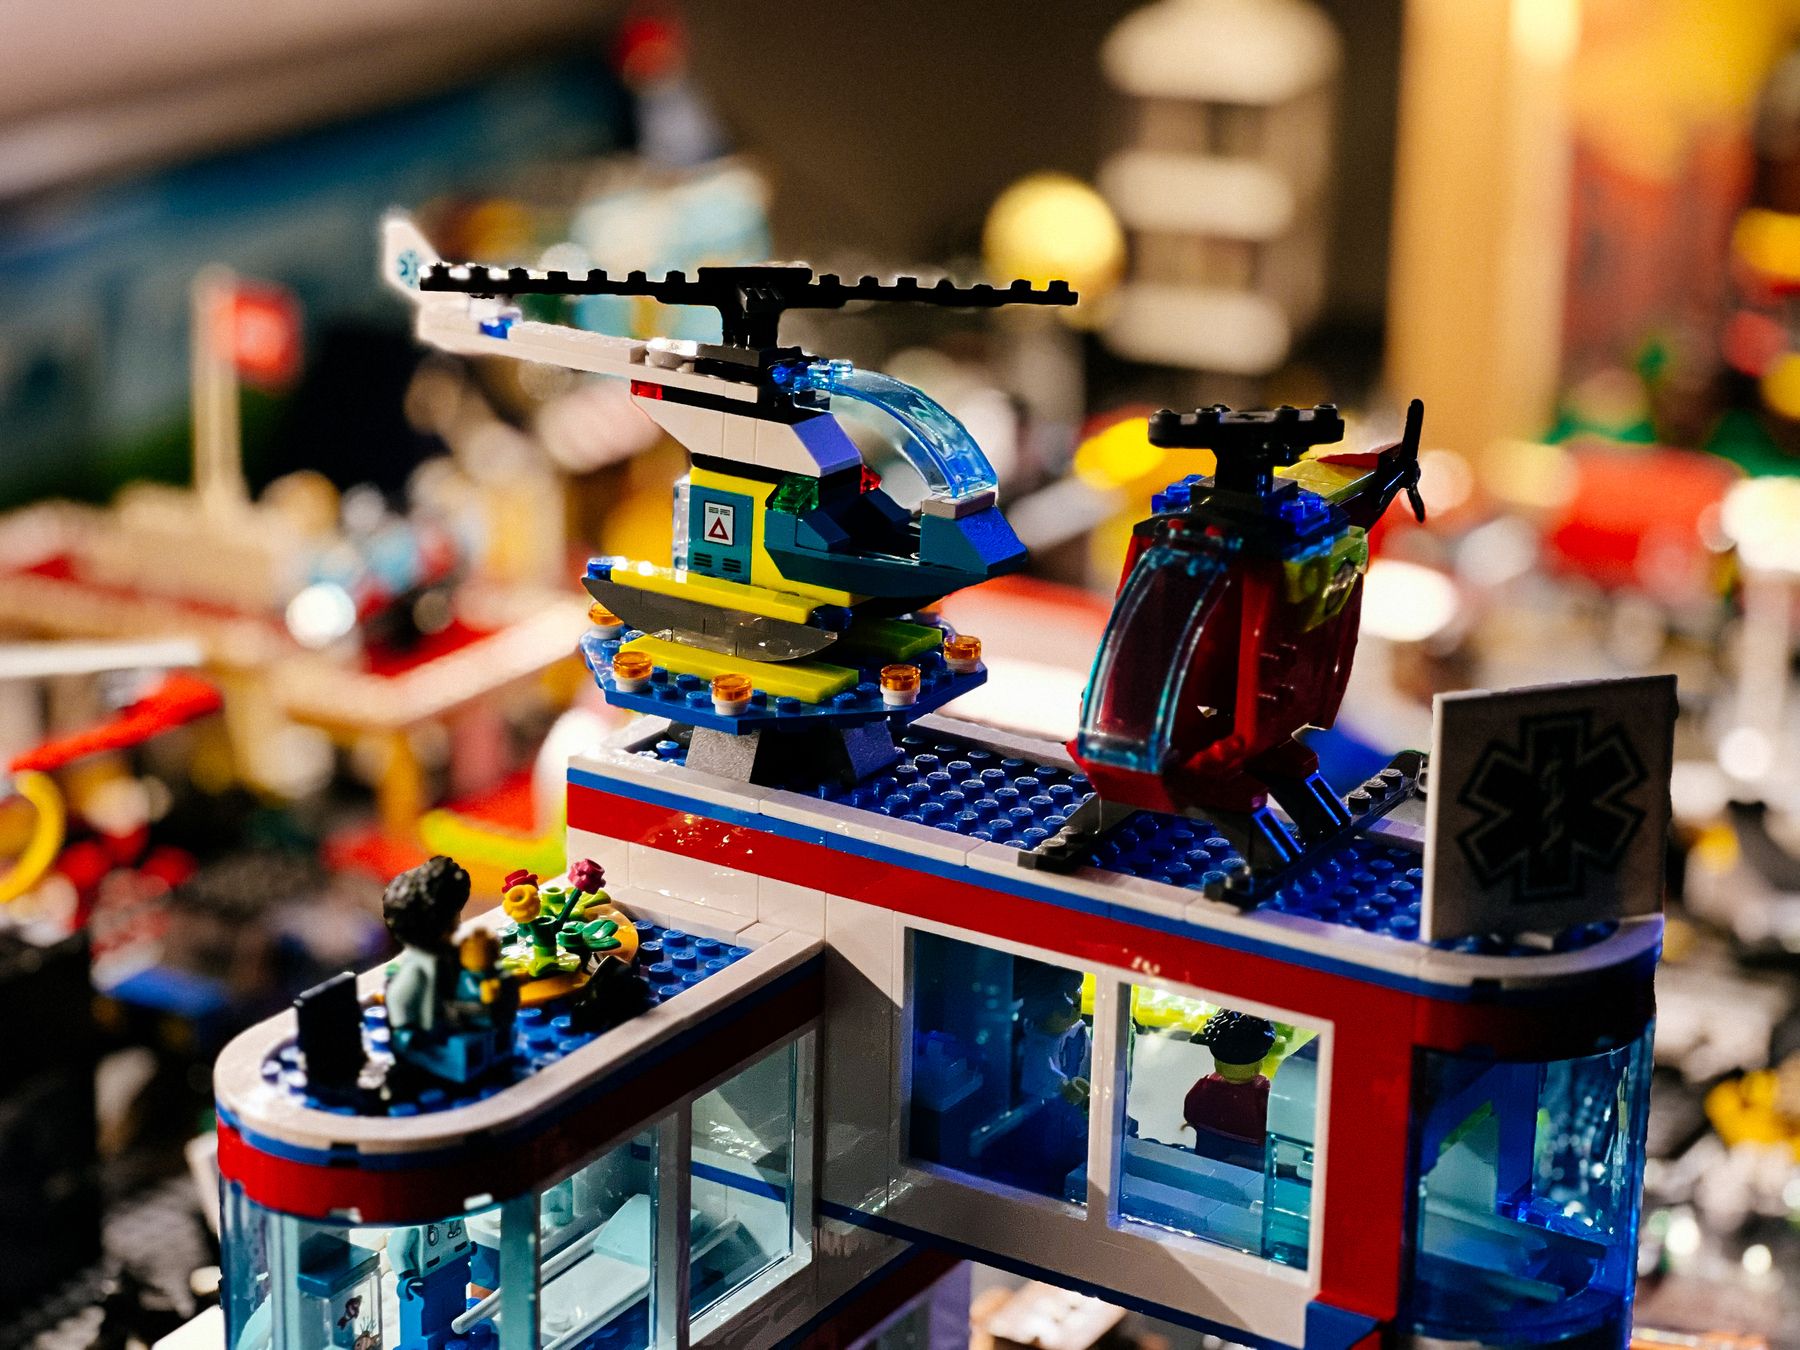 A detailed LEGO set depicts a hospital scene with a helicopter landing pad on the roof where two colorful LEGO helicopters are stationed. Minifigures are placed around, suggesting activity and storytelling within the setup.